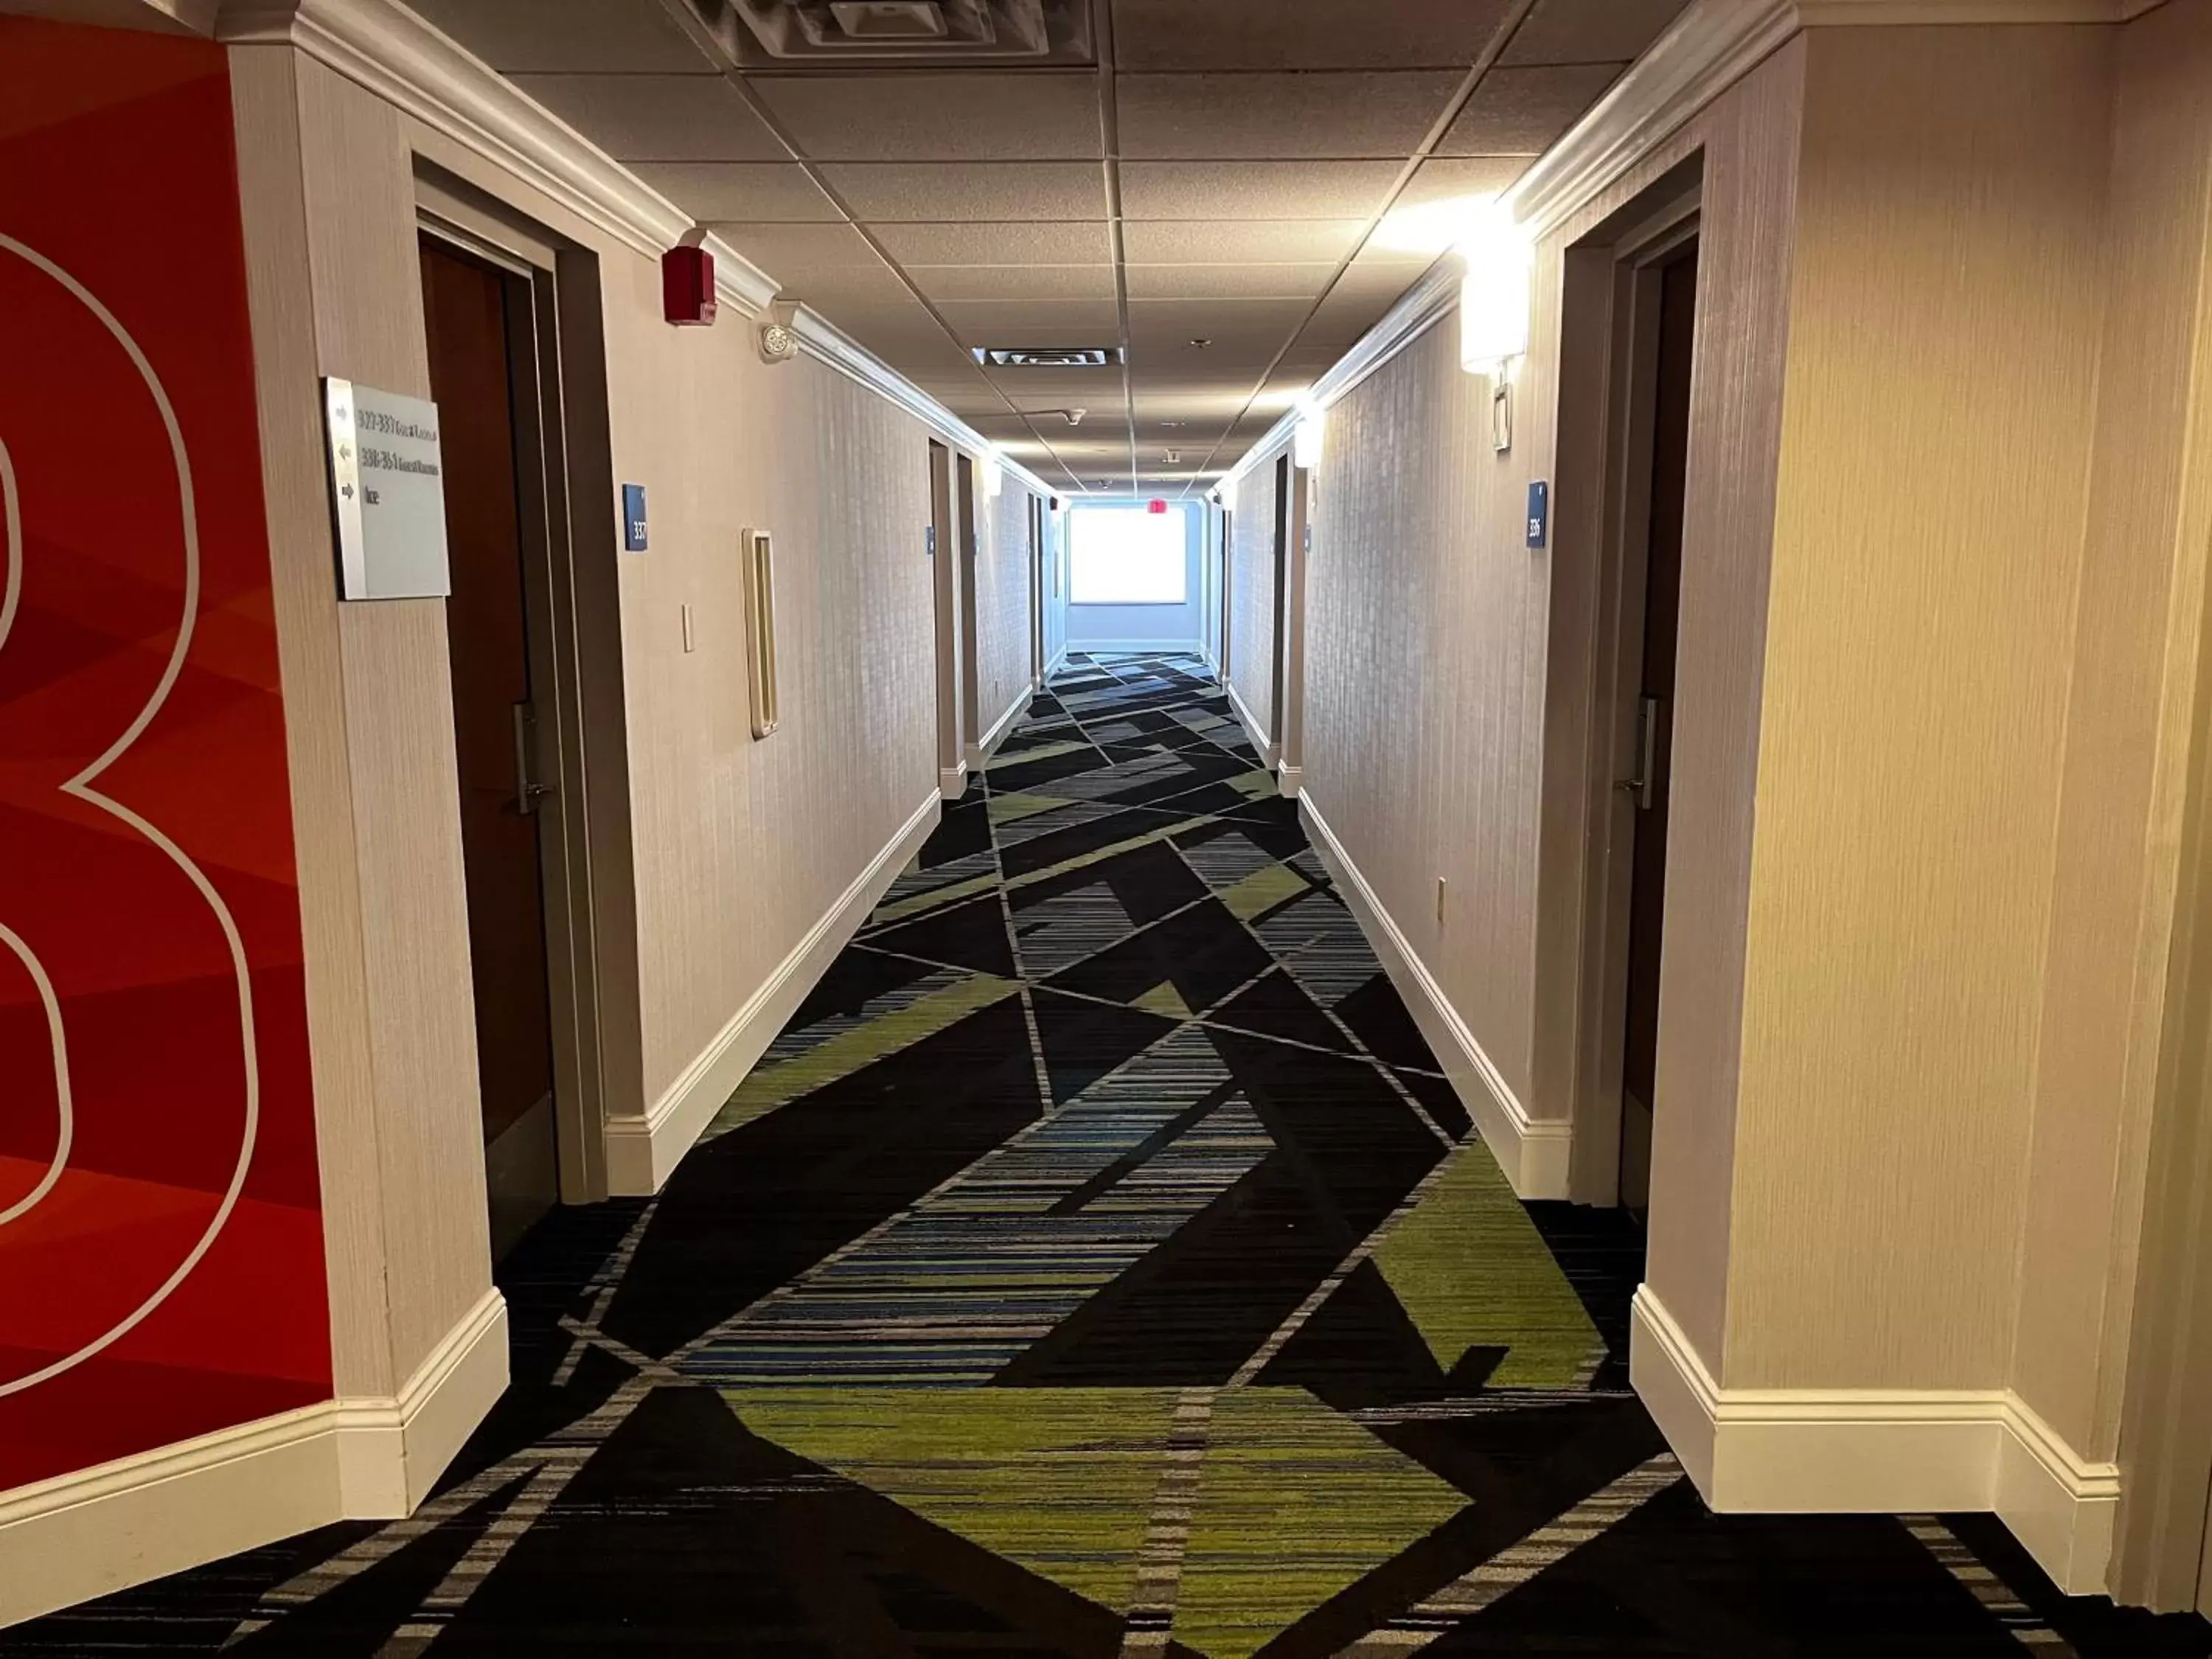 Property building in Holiday Inn Express & Suites Williamsport, an IHG Hotel